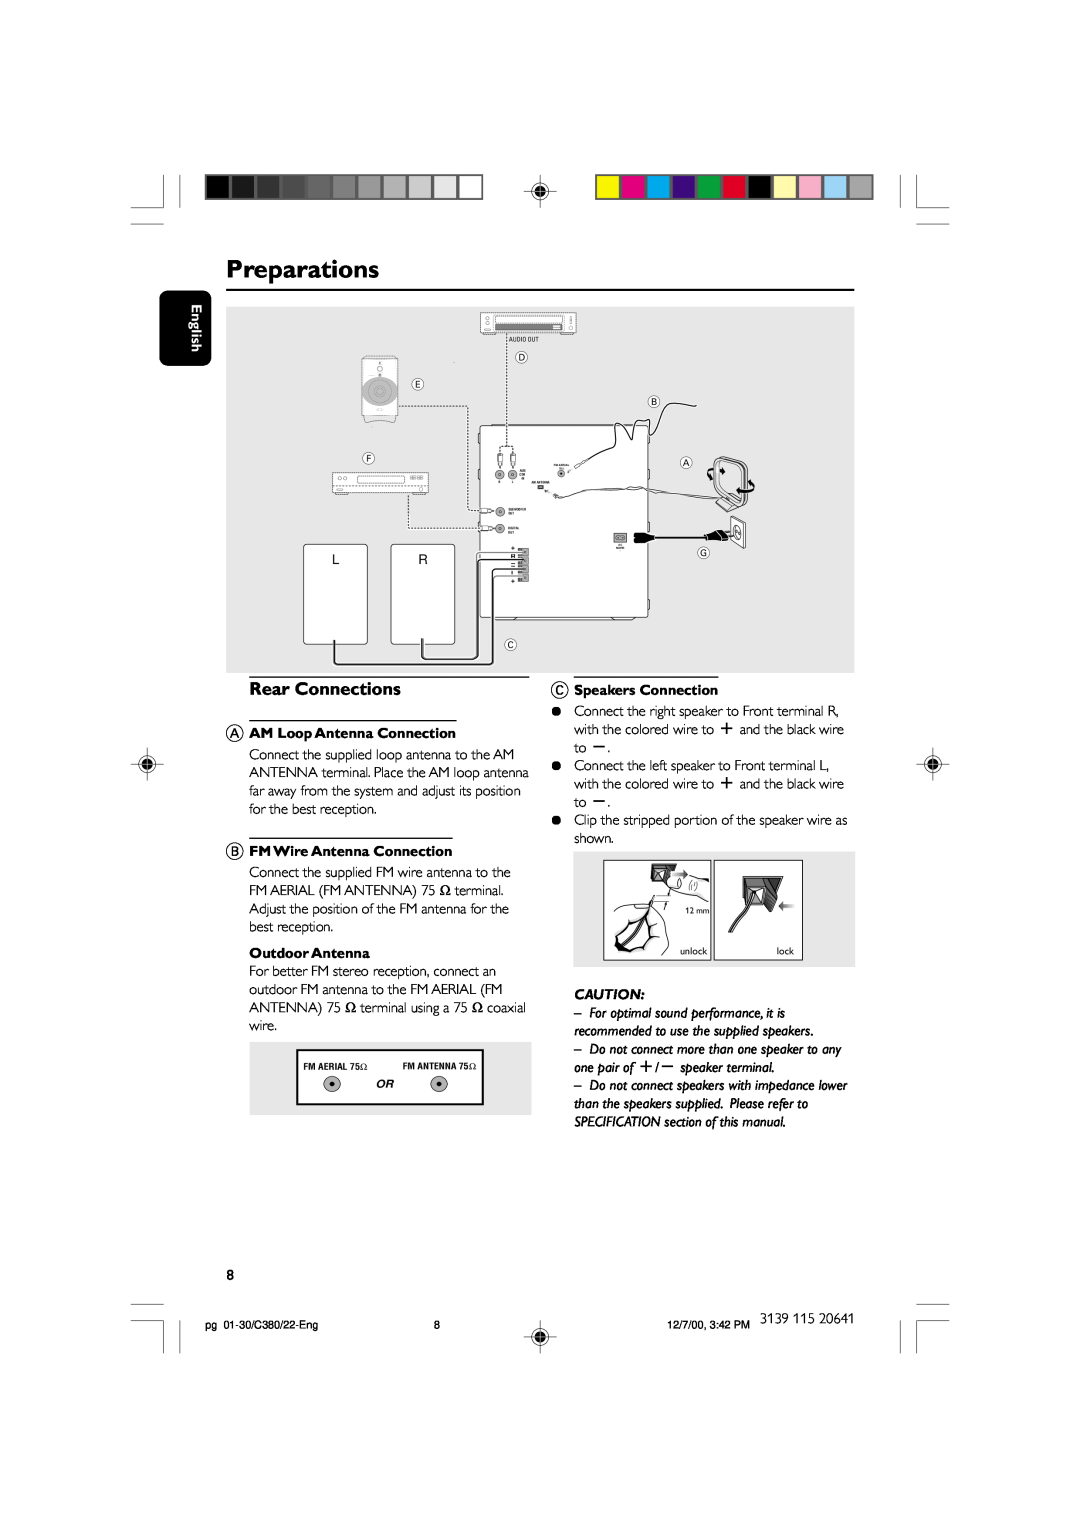 Philips FW-C380 manual Preparations, English, AAM Loop Antenna Connection, BFM Wire Antenna Connection, Outdoor Antenna 